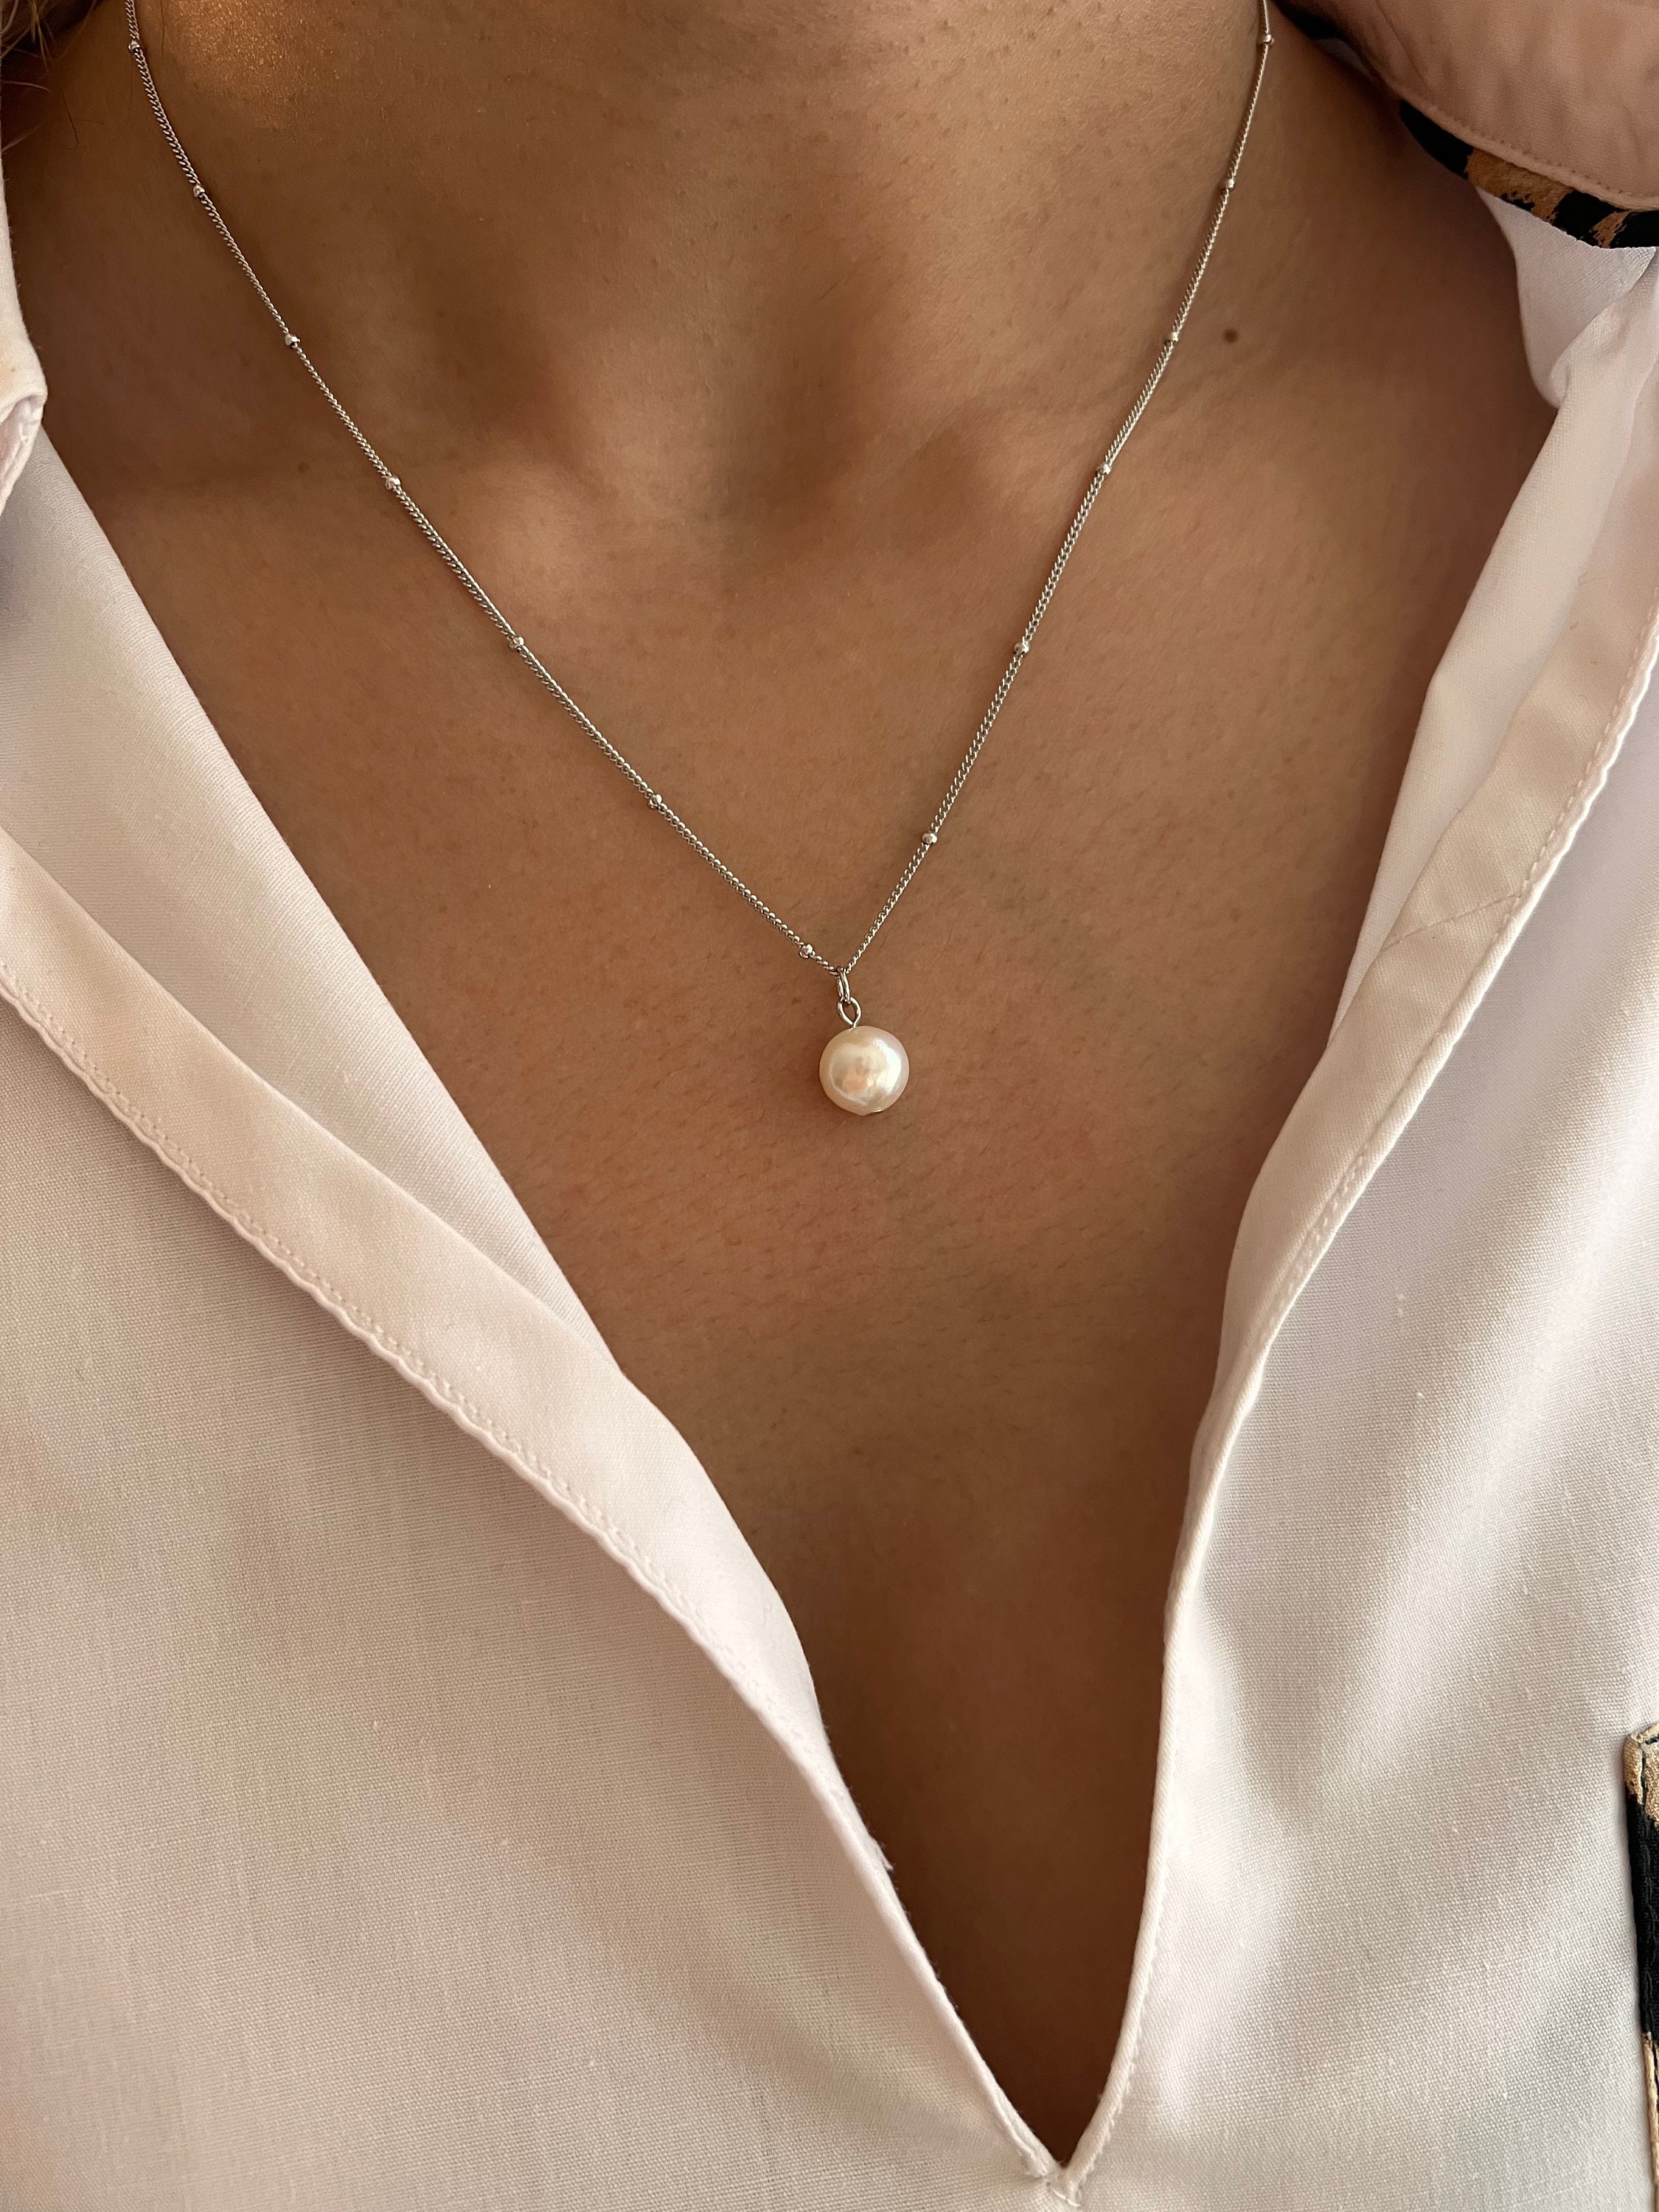 18 Ball Necklace Pearl - Baroque 925/ Necklace Silver Finland Pearls / With Silver Necklace Pearl Etsy Carat Pearl Gold Freshwater Gold Chain / Plated Sterling /